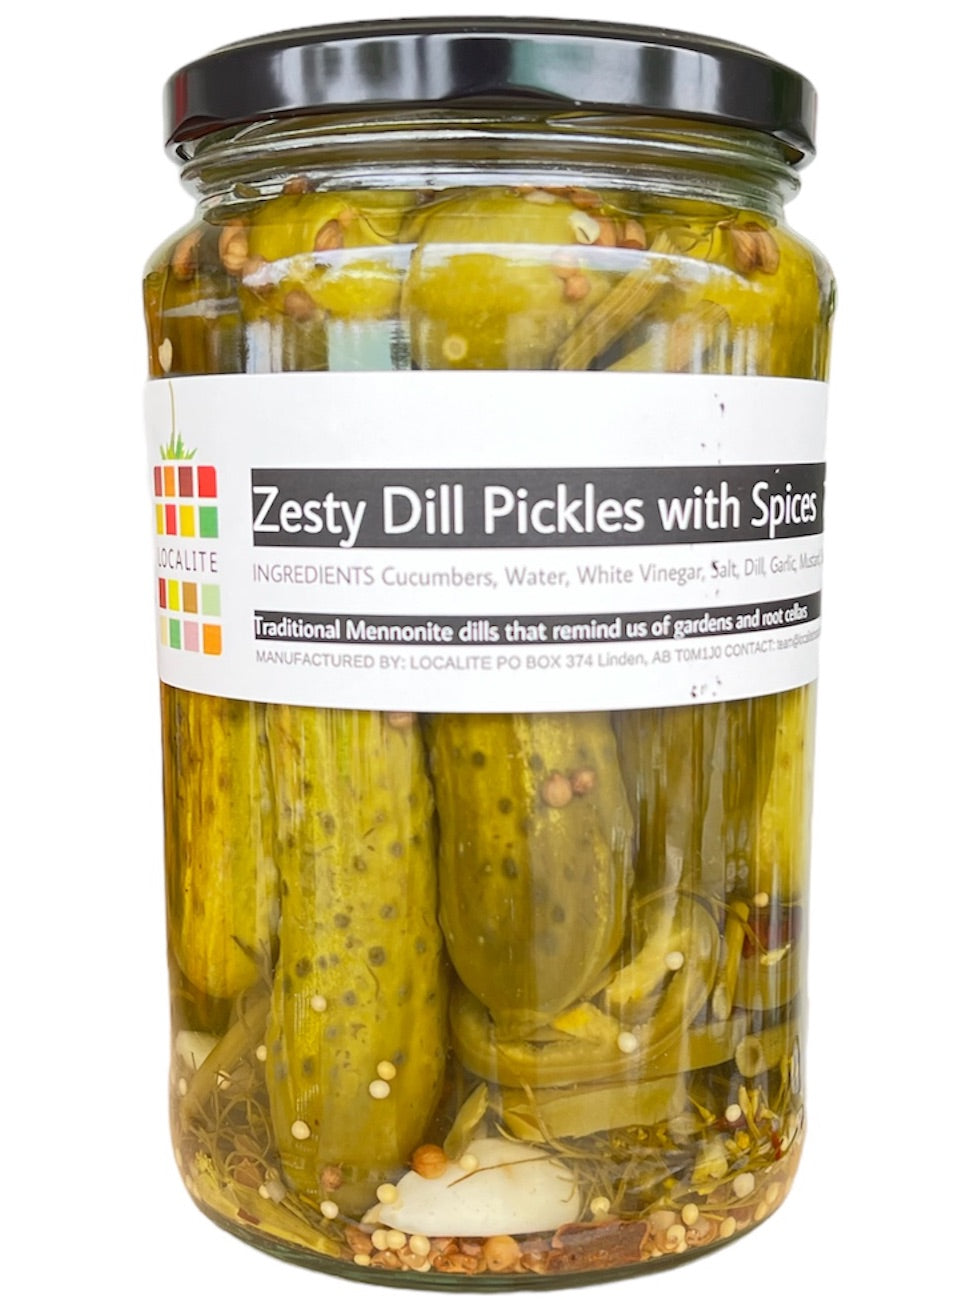 Zesty Dill Pickles with Spices